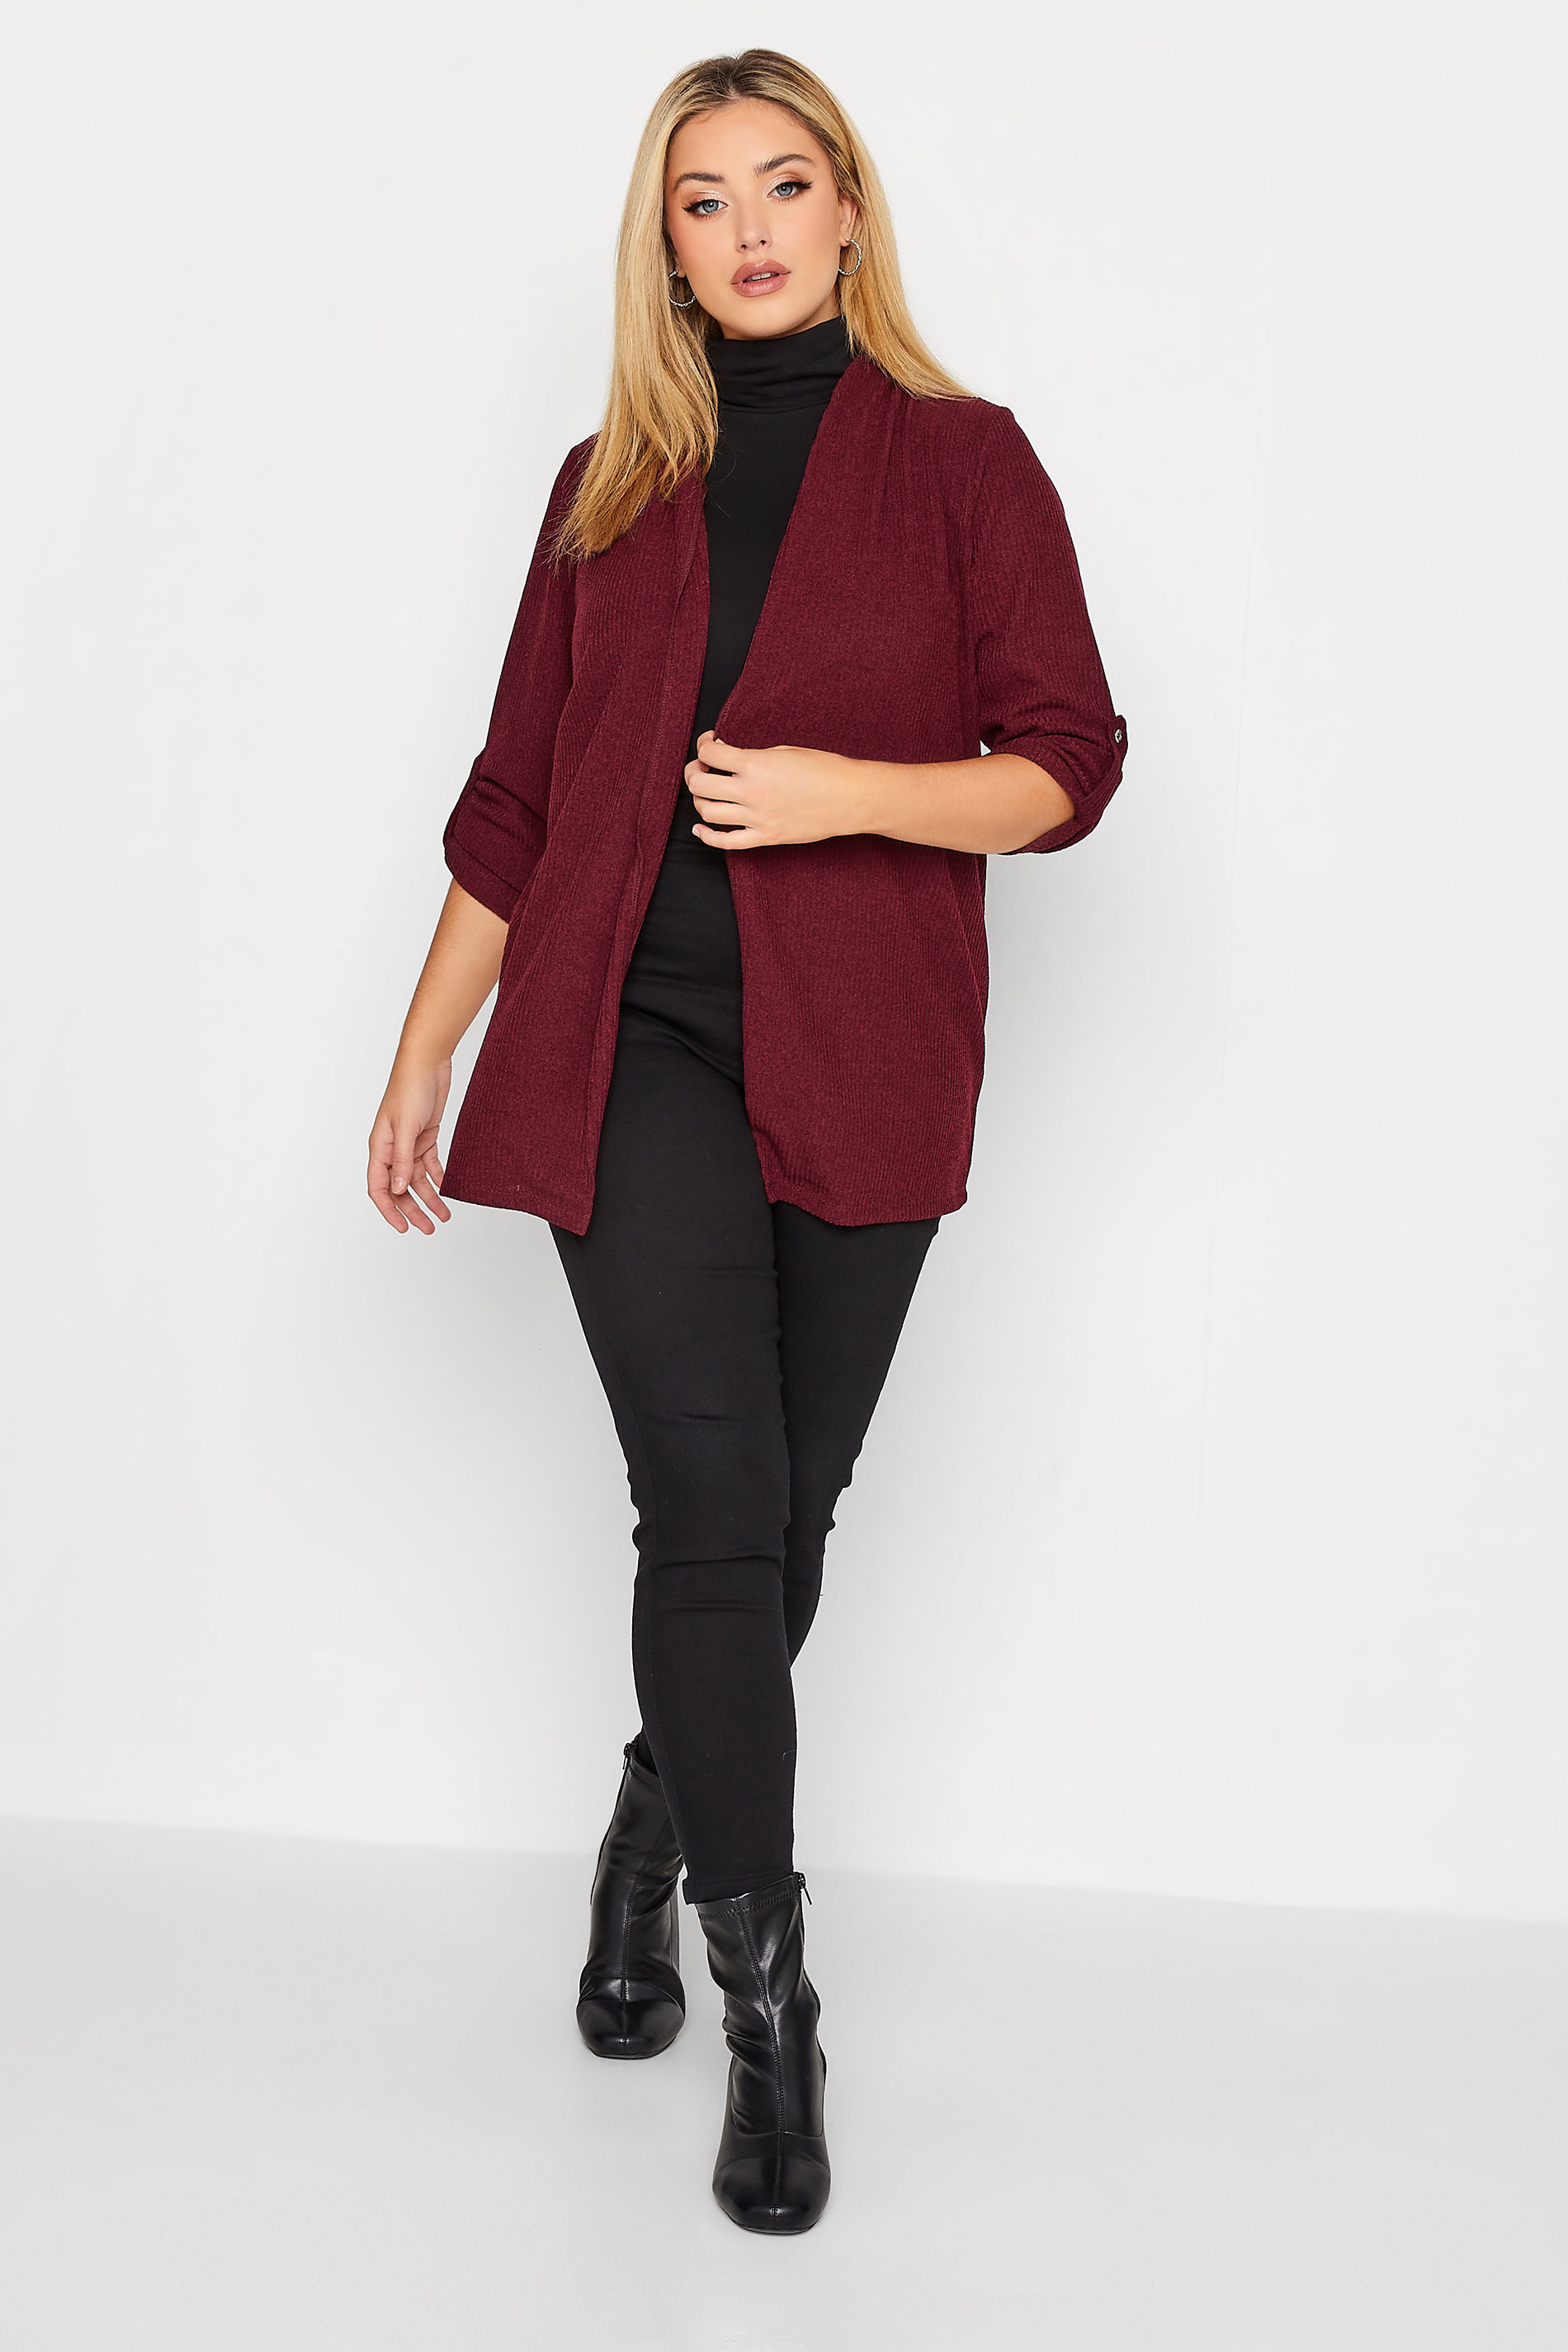 Curve Plus Size Burgundy Red Ribbed Cardigan | Yours Clothing  2